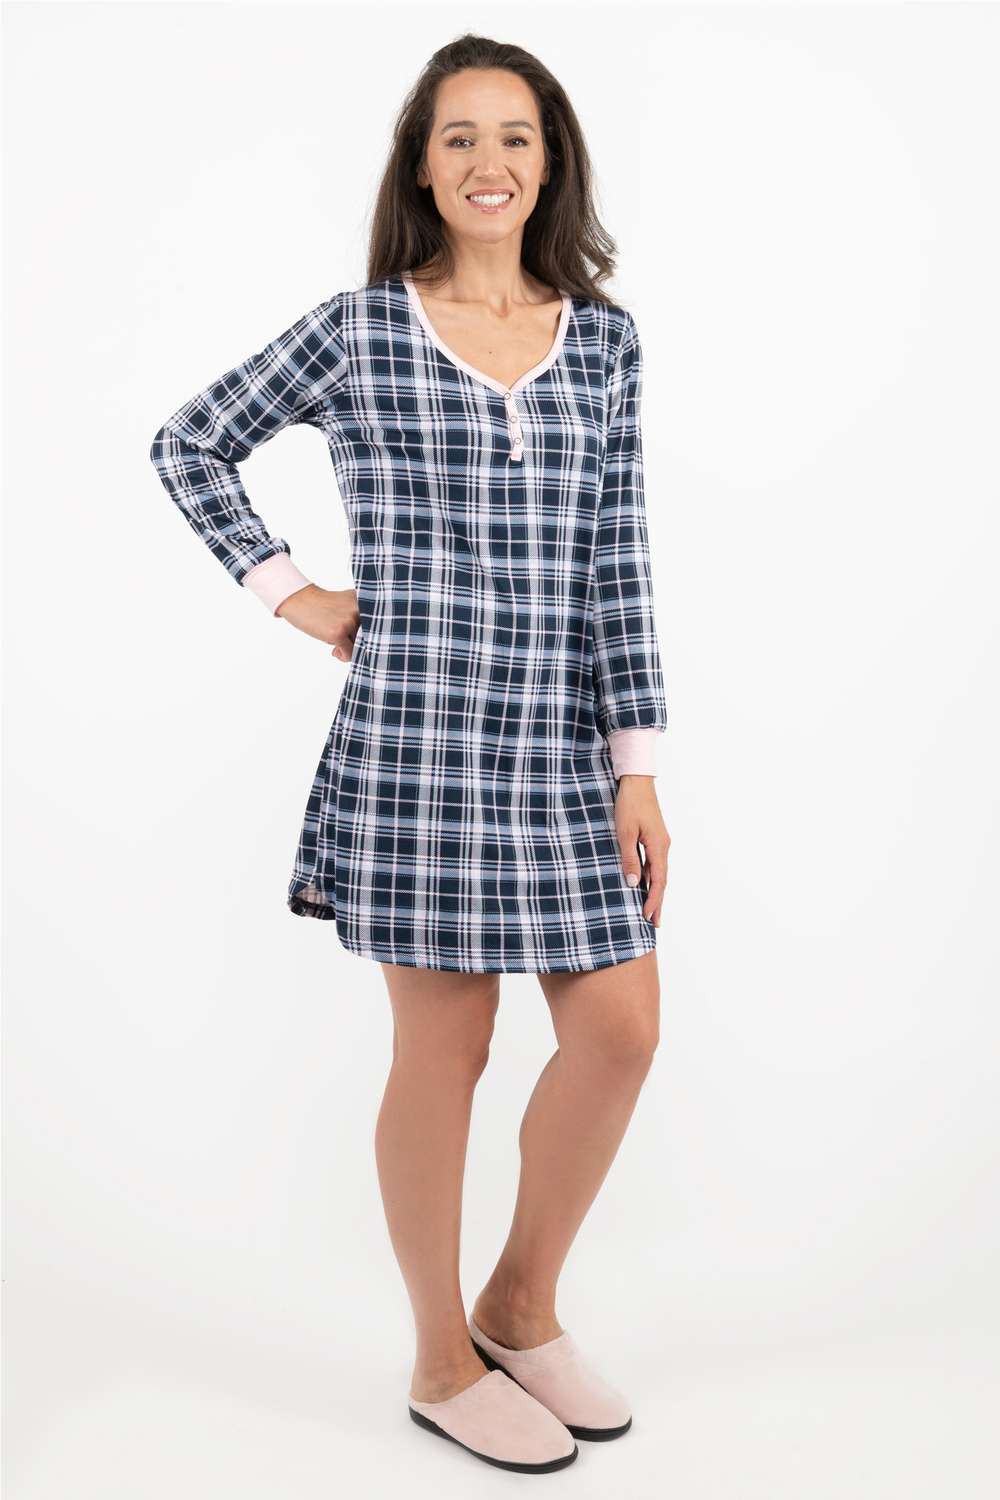 Ultra soft nightgown, pink and blue plaid